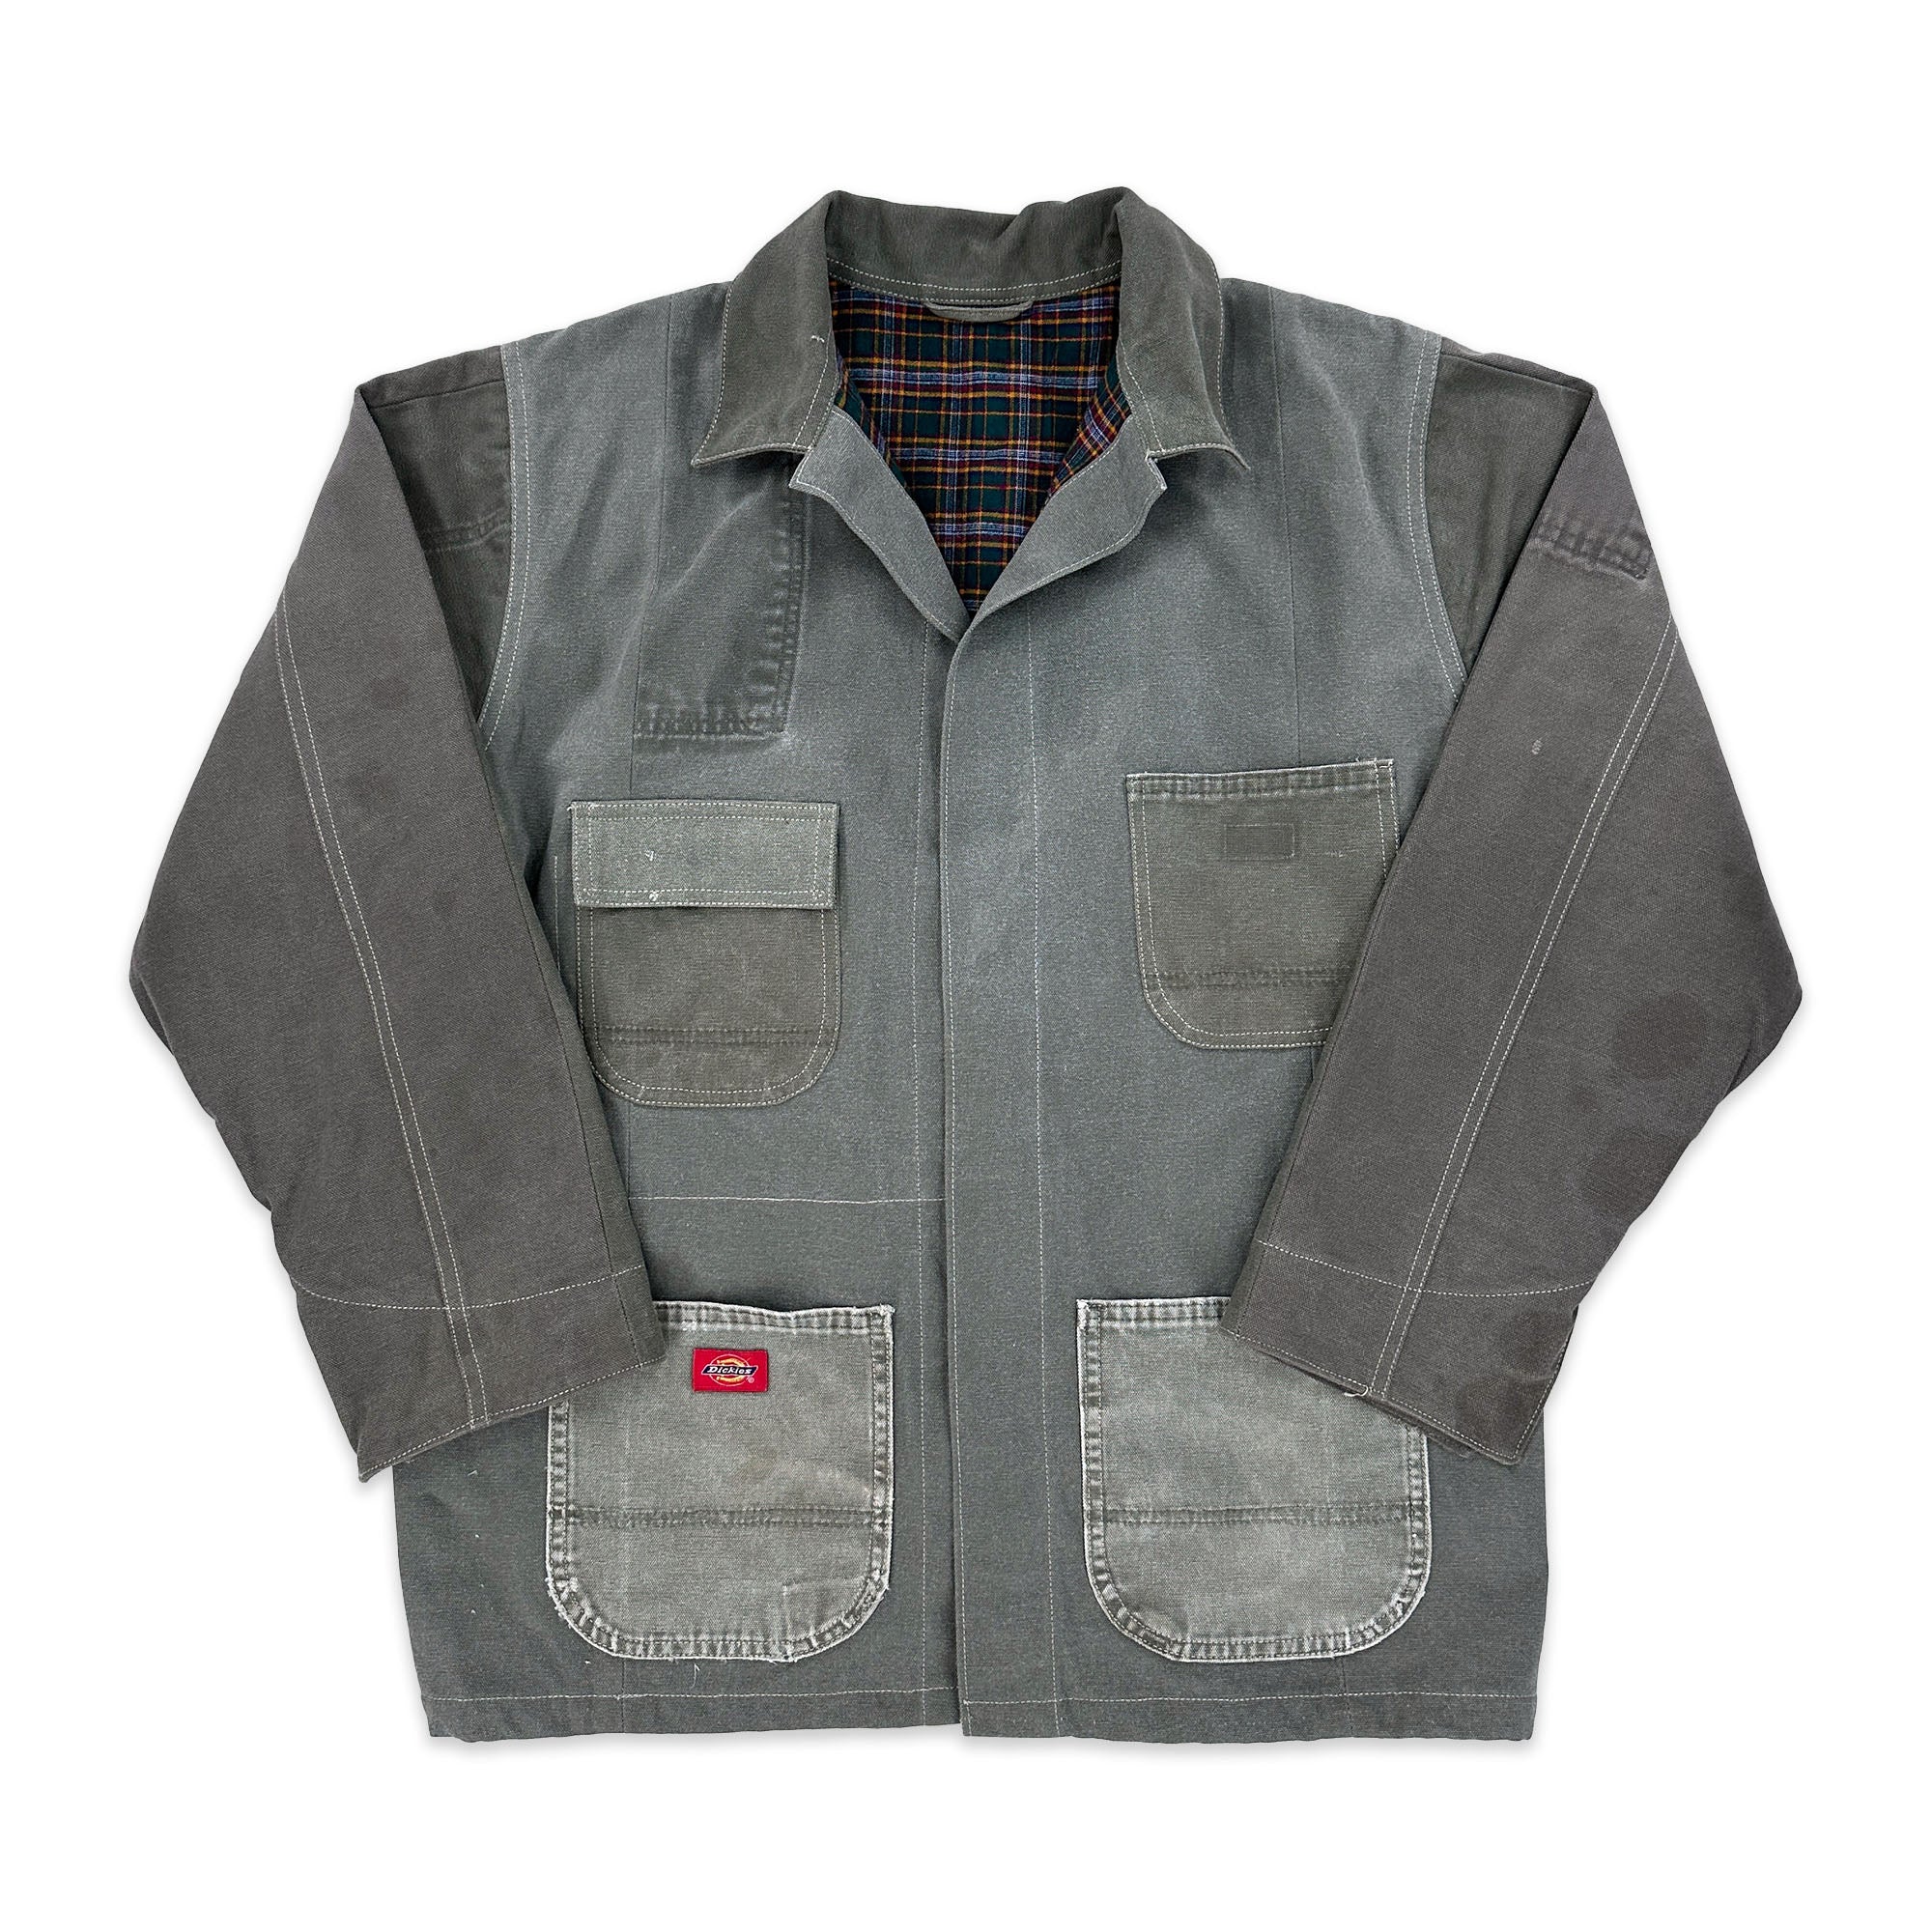 Chore Coat Made From Upcycled Work Jeans - L/XL